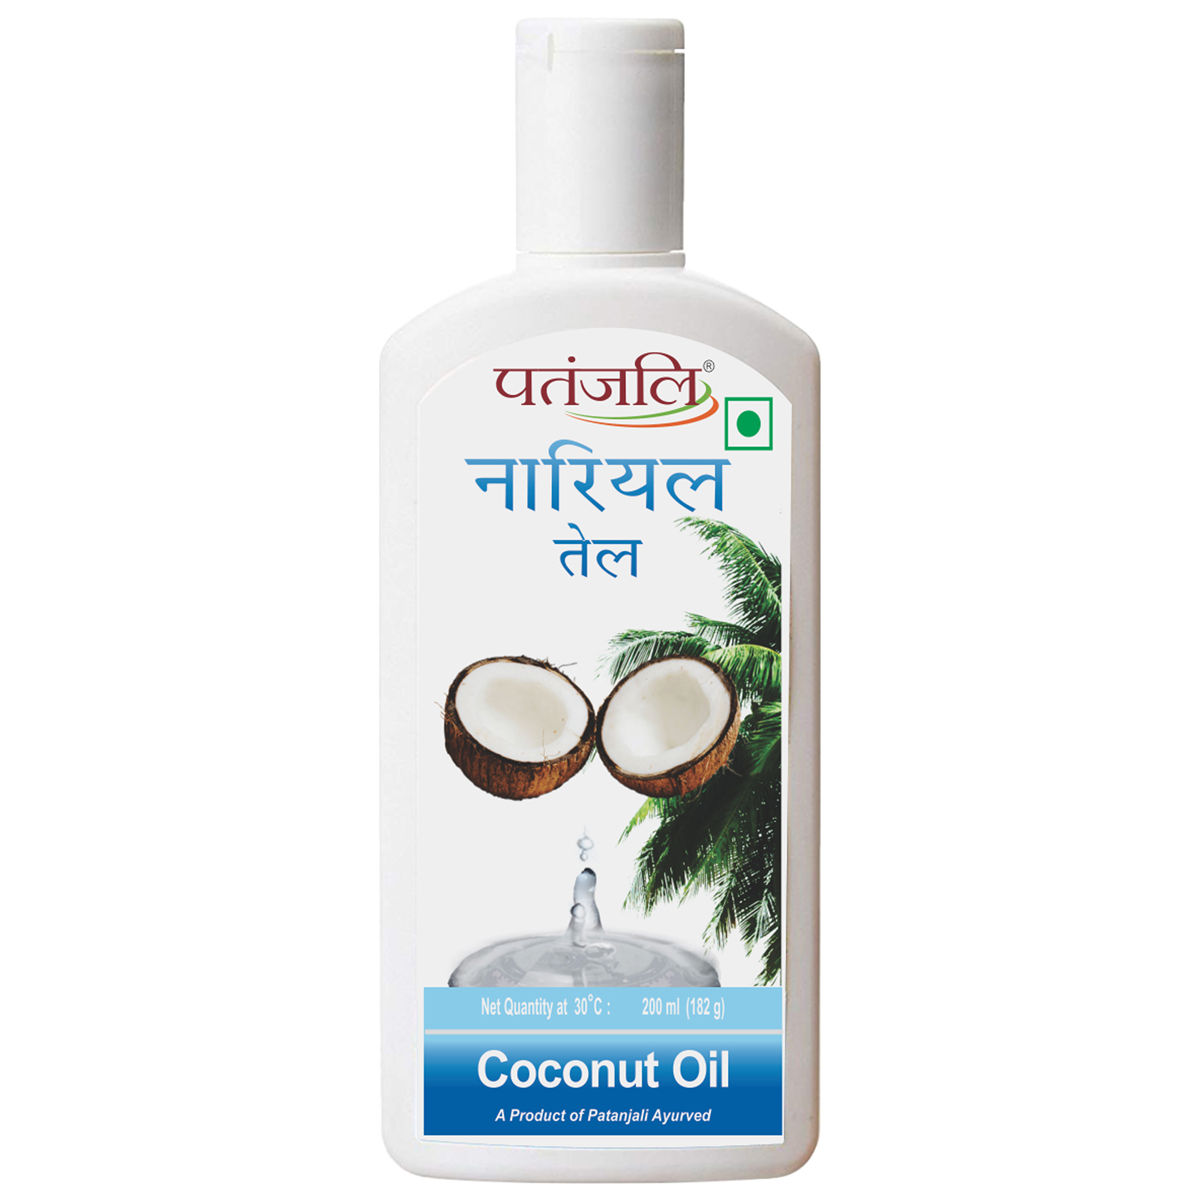 Patanjali Coconut Oil, 200 ml Price, Uses, Side Effects, Composition ...